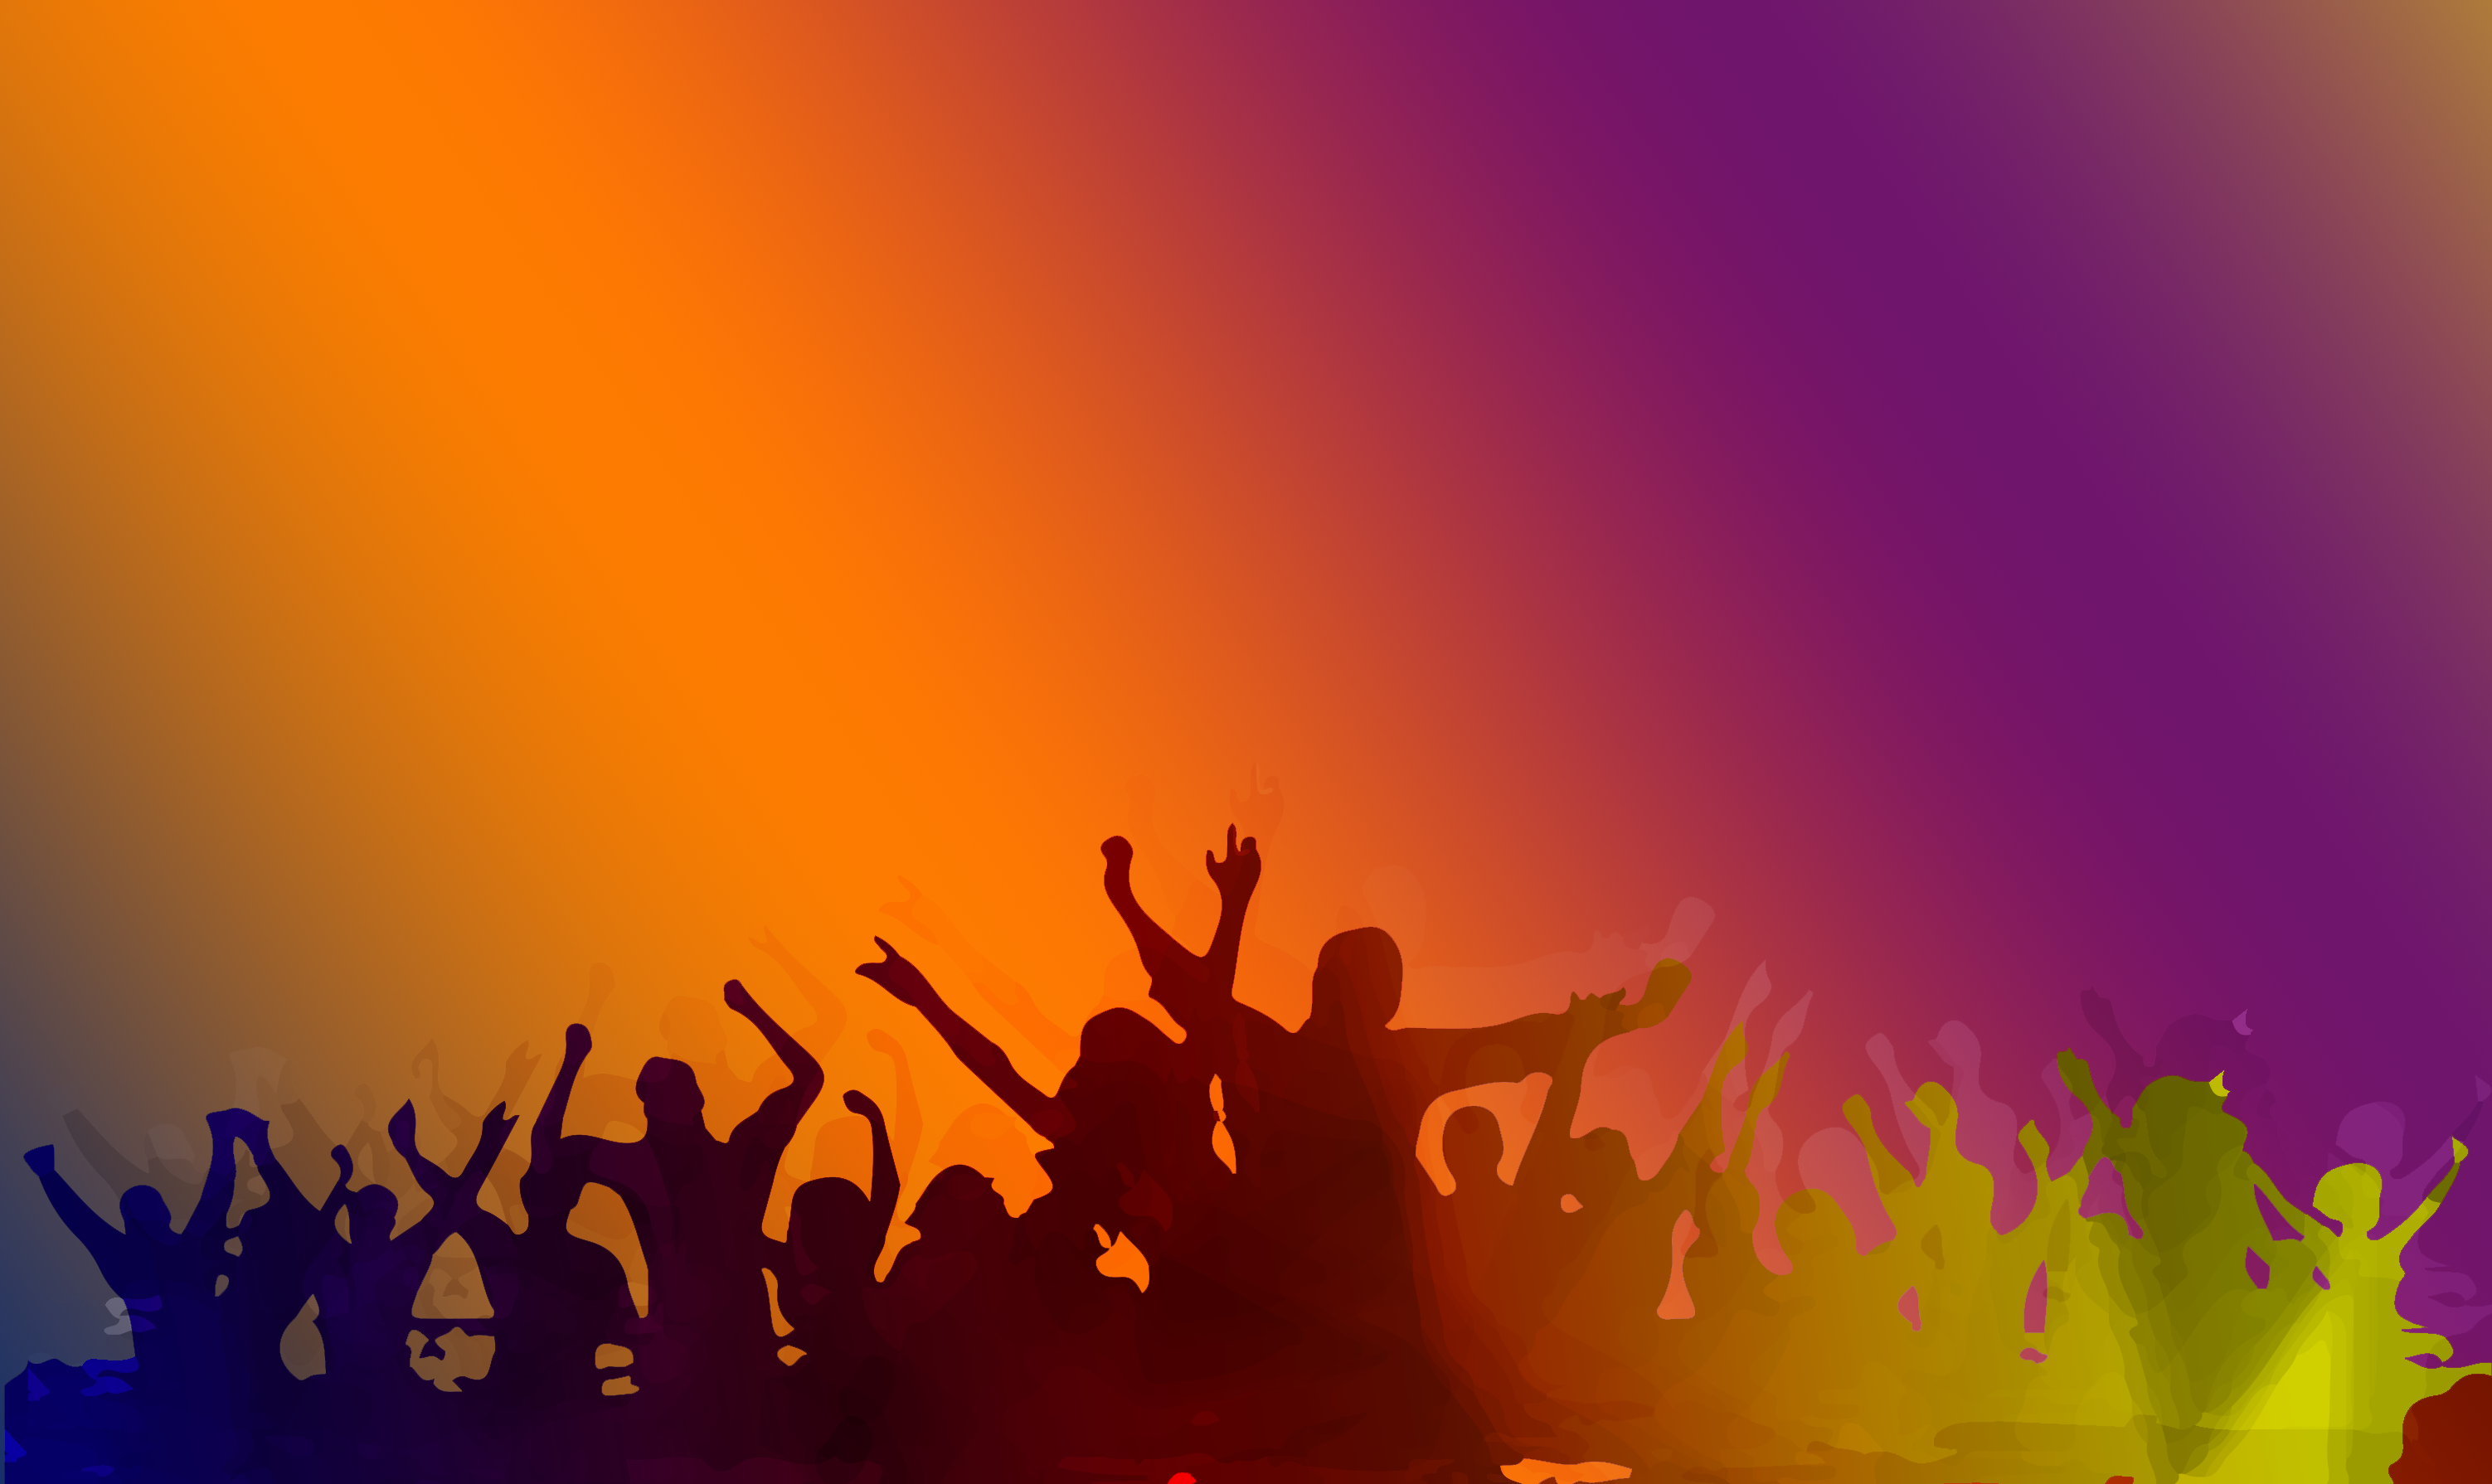 background of crowd silhouettes against gradient background